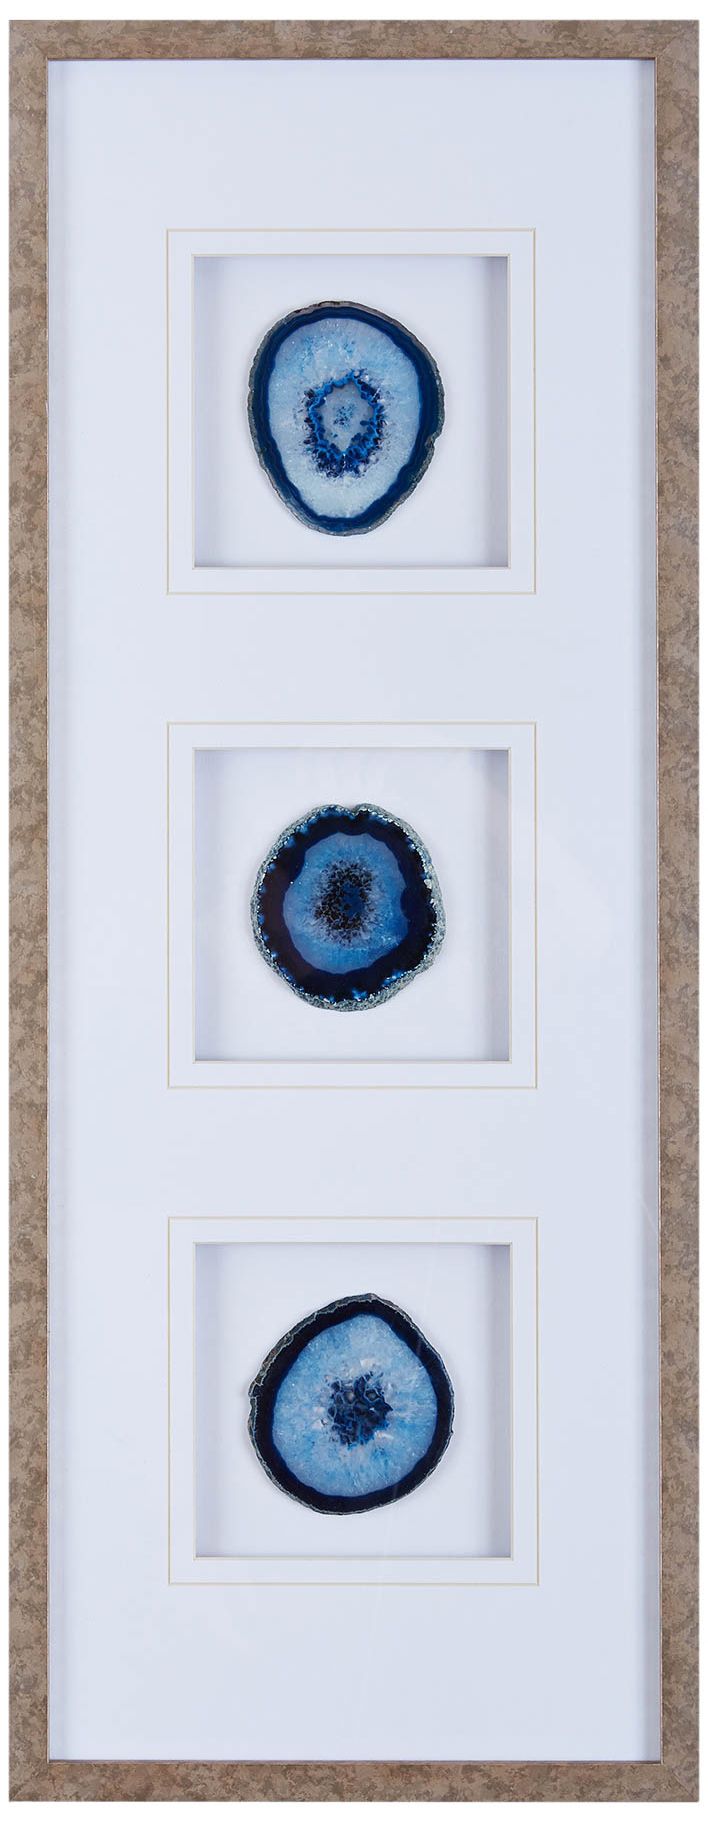 TOZAI Genuine Blue Agate Set of Photo Frames in Gift Box Includes Sizes: 4